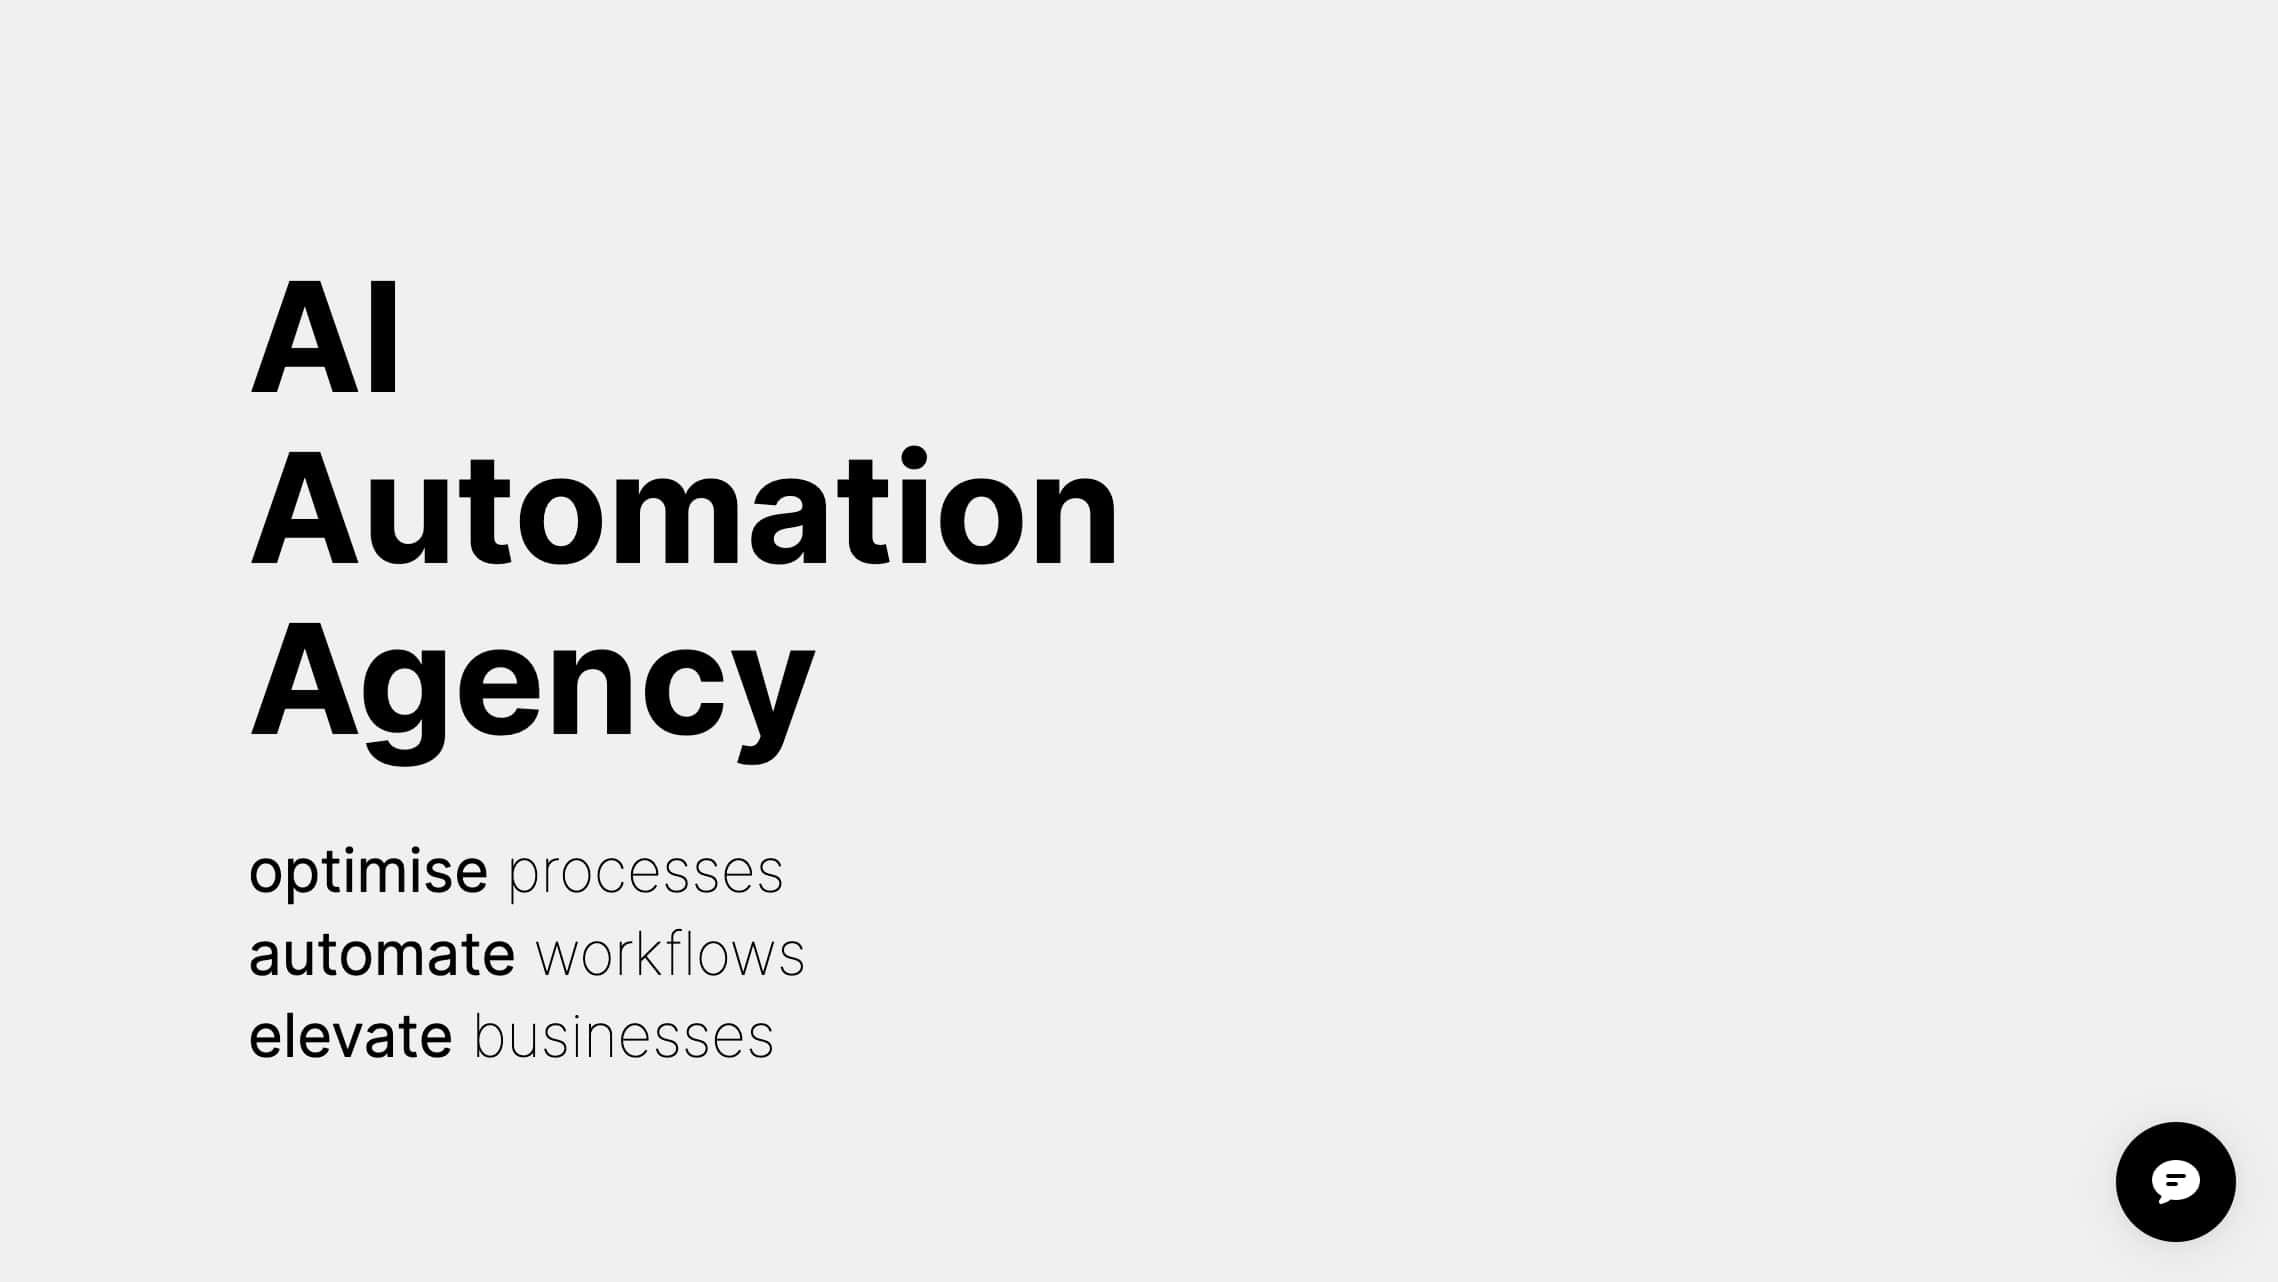 AI Automation Agency services